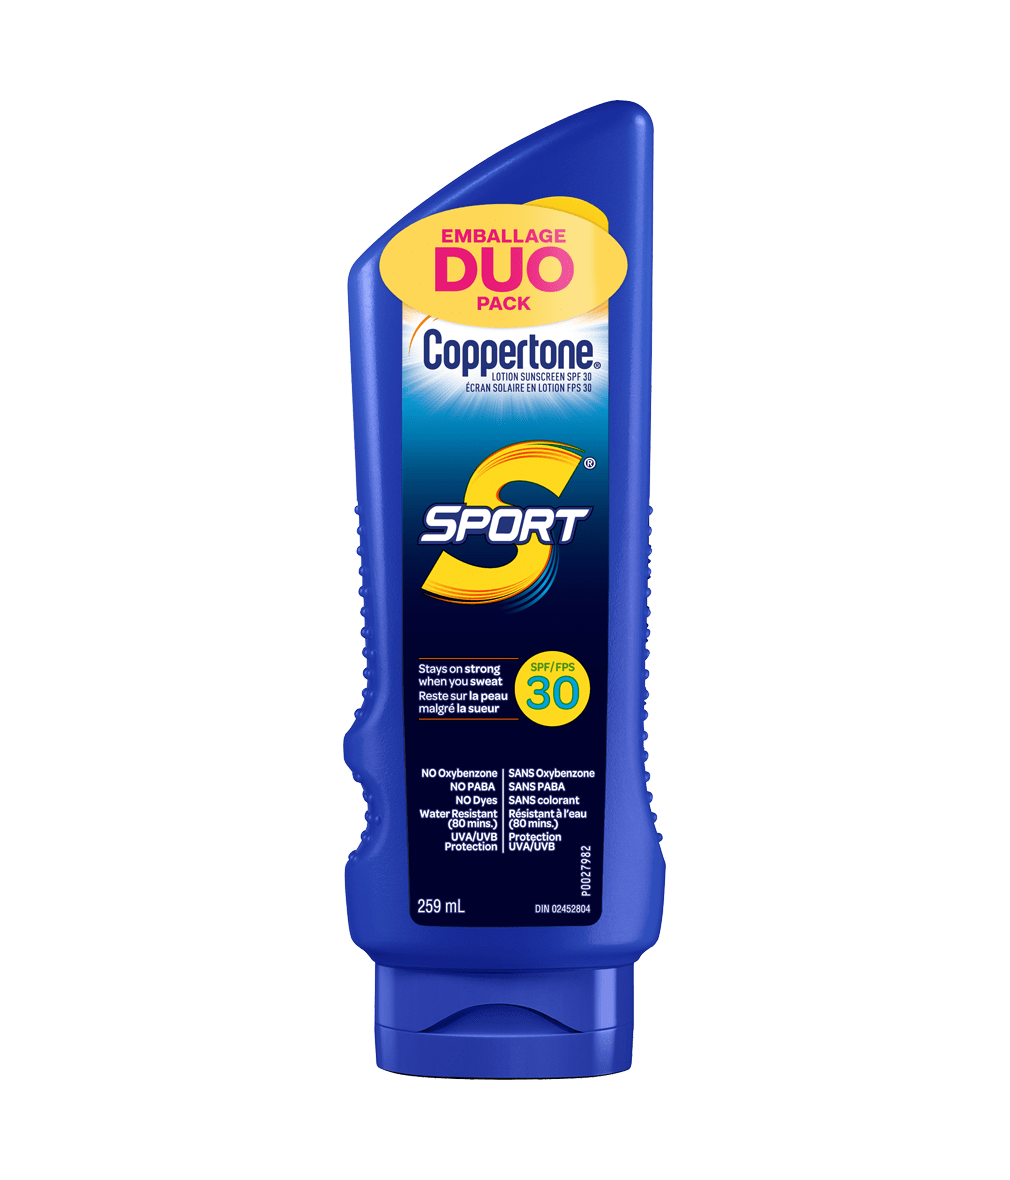 SPORT SUNSCREEN LOTION SPF30 - DUO PACK